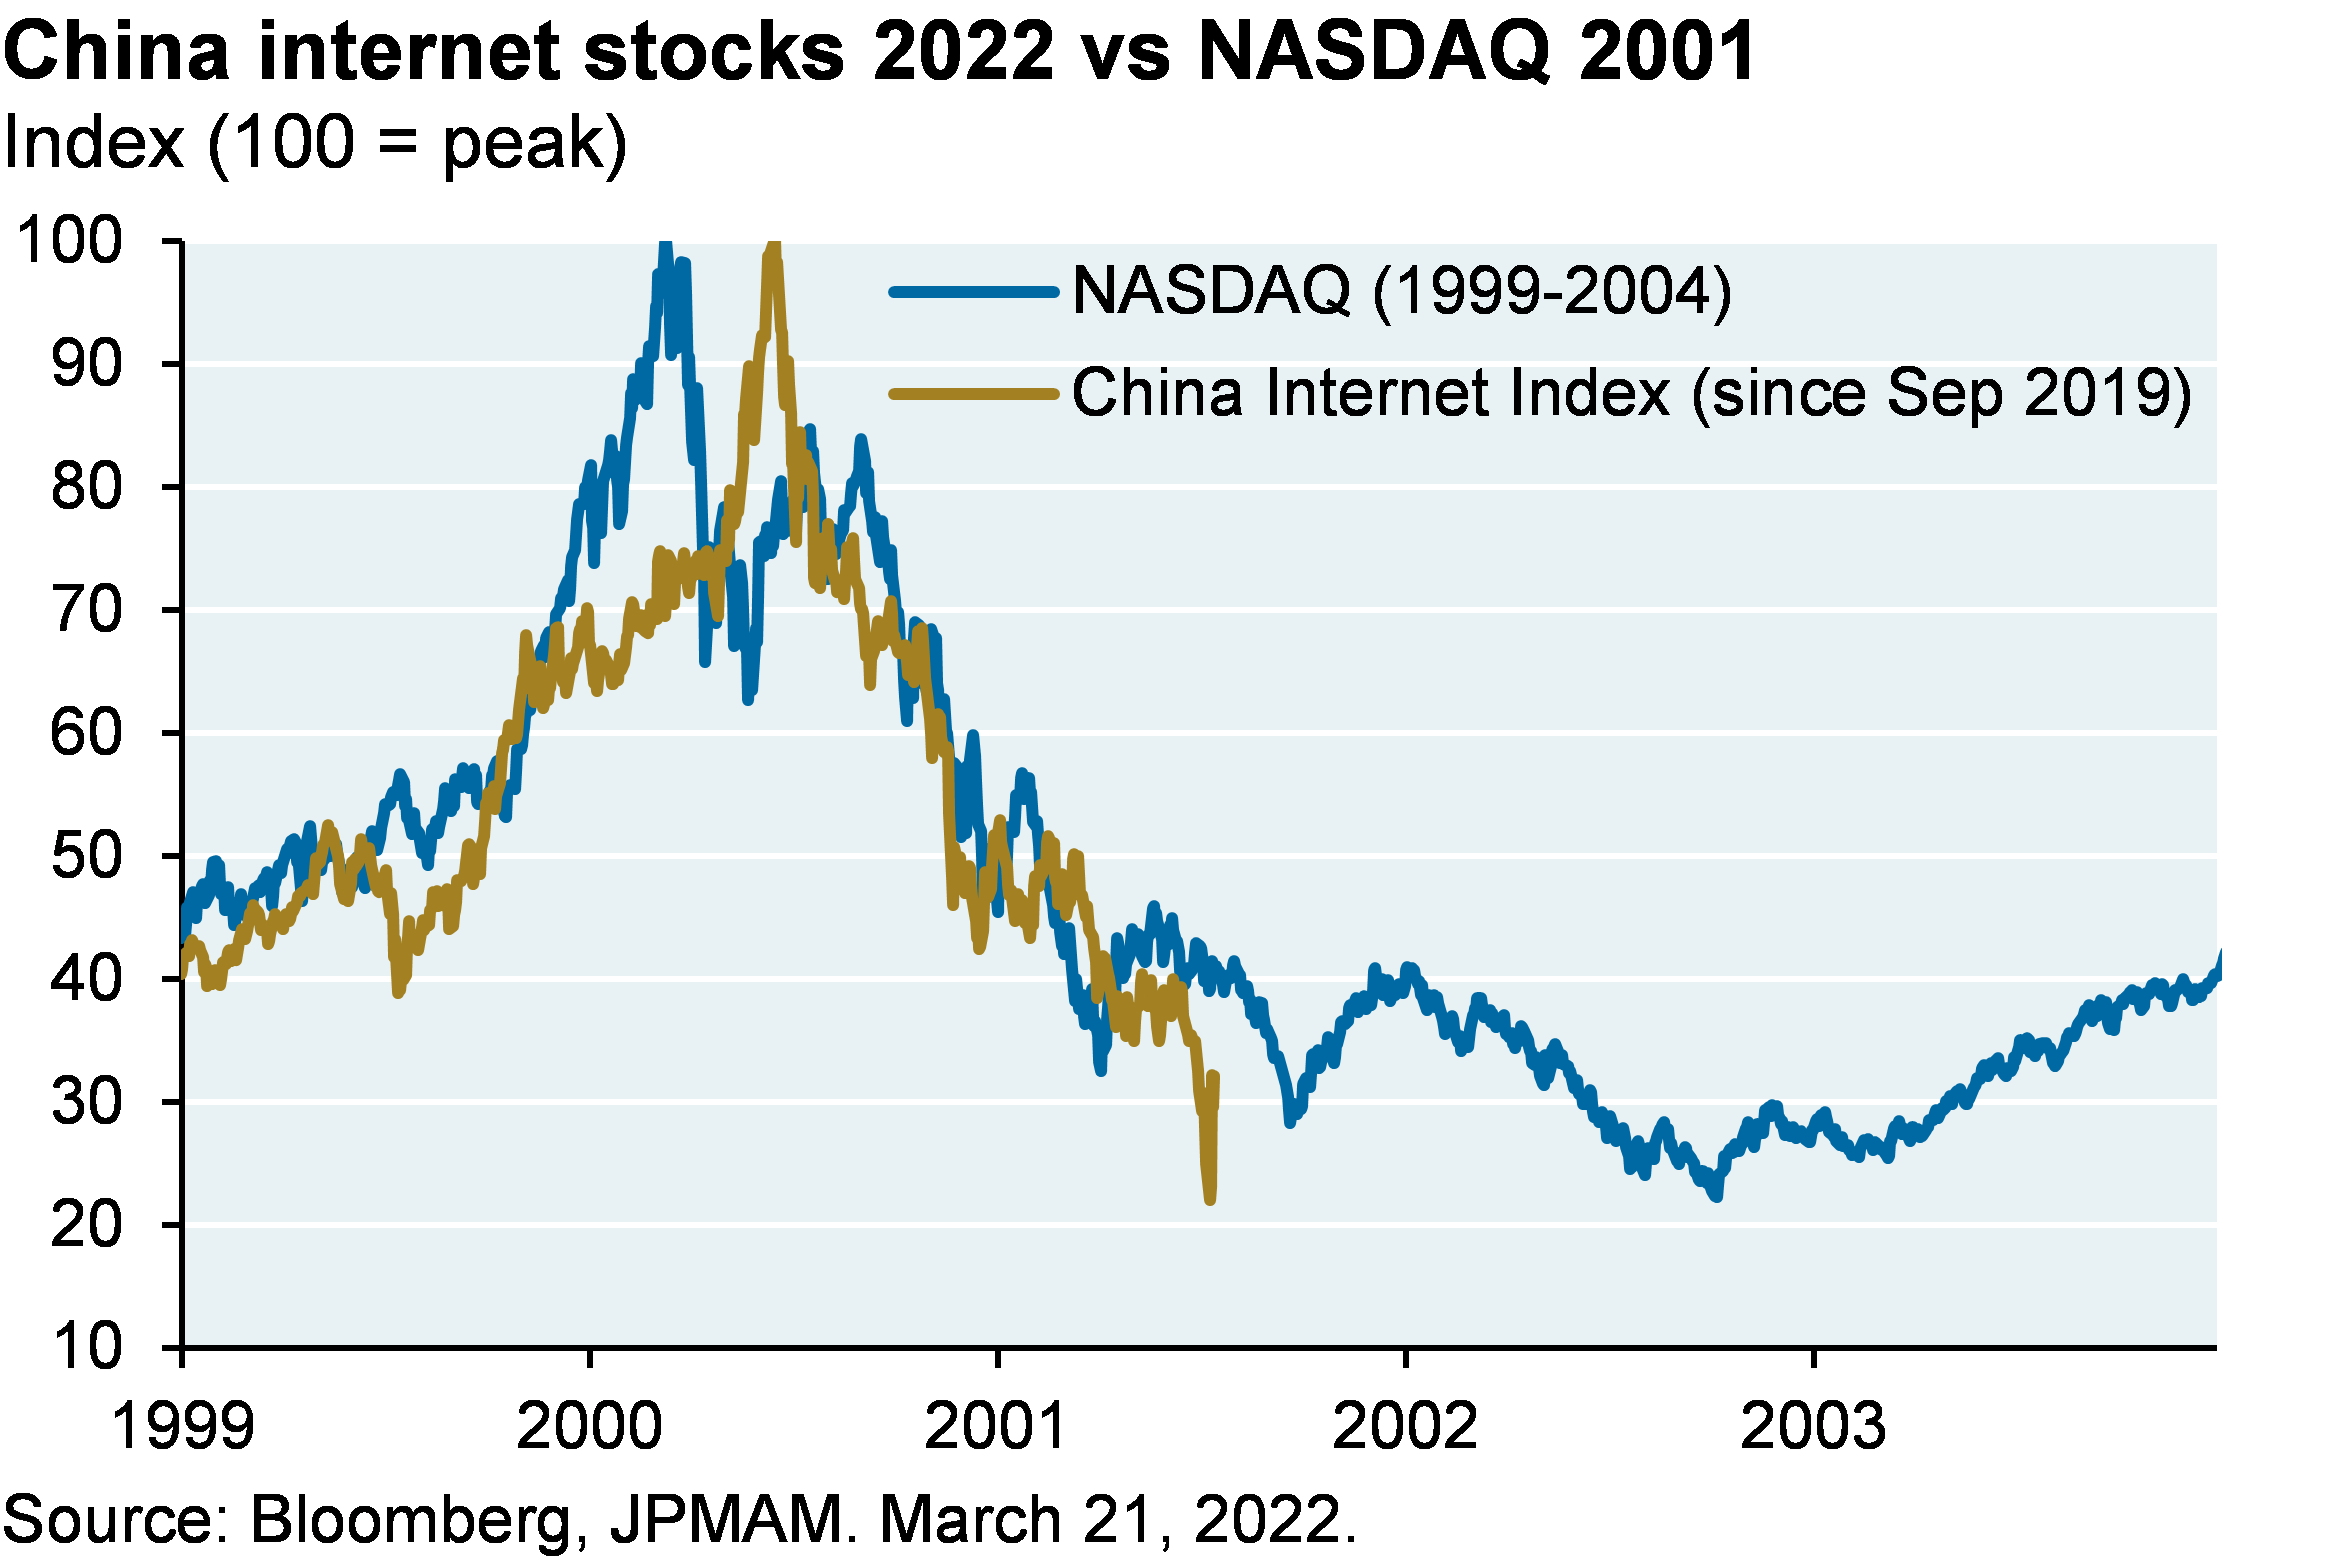 Line chart shows a comparison between the return on the NASDAQ from 1999 to 2004 and China internet stocks since Sept. 2019. The chart shows that the China internet correction is close to matching the drawdown of the NASDAQ post-tech bubble.